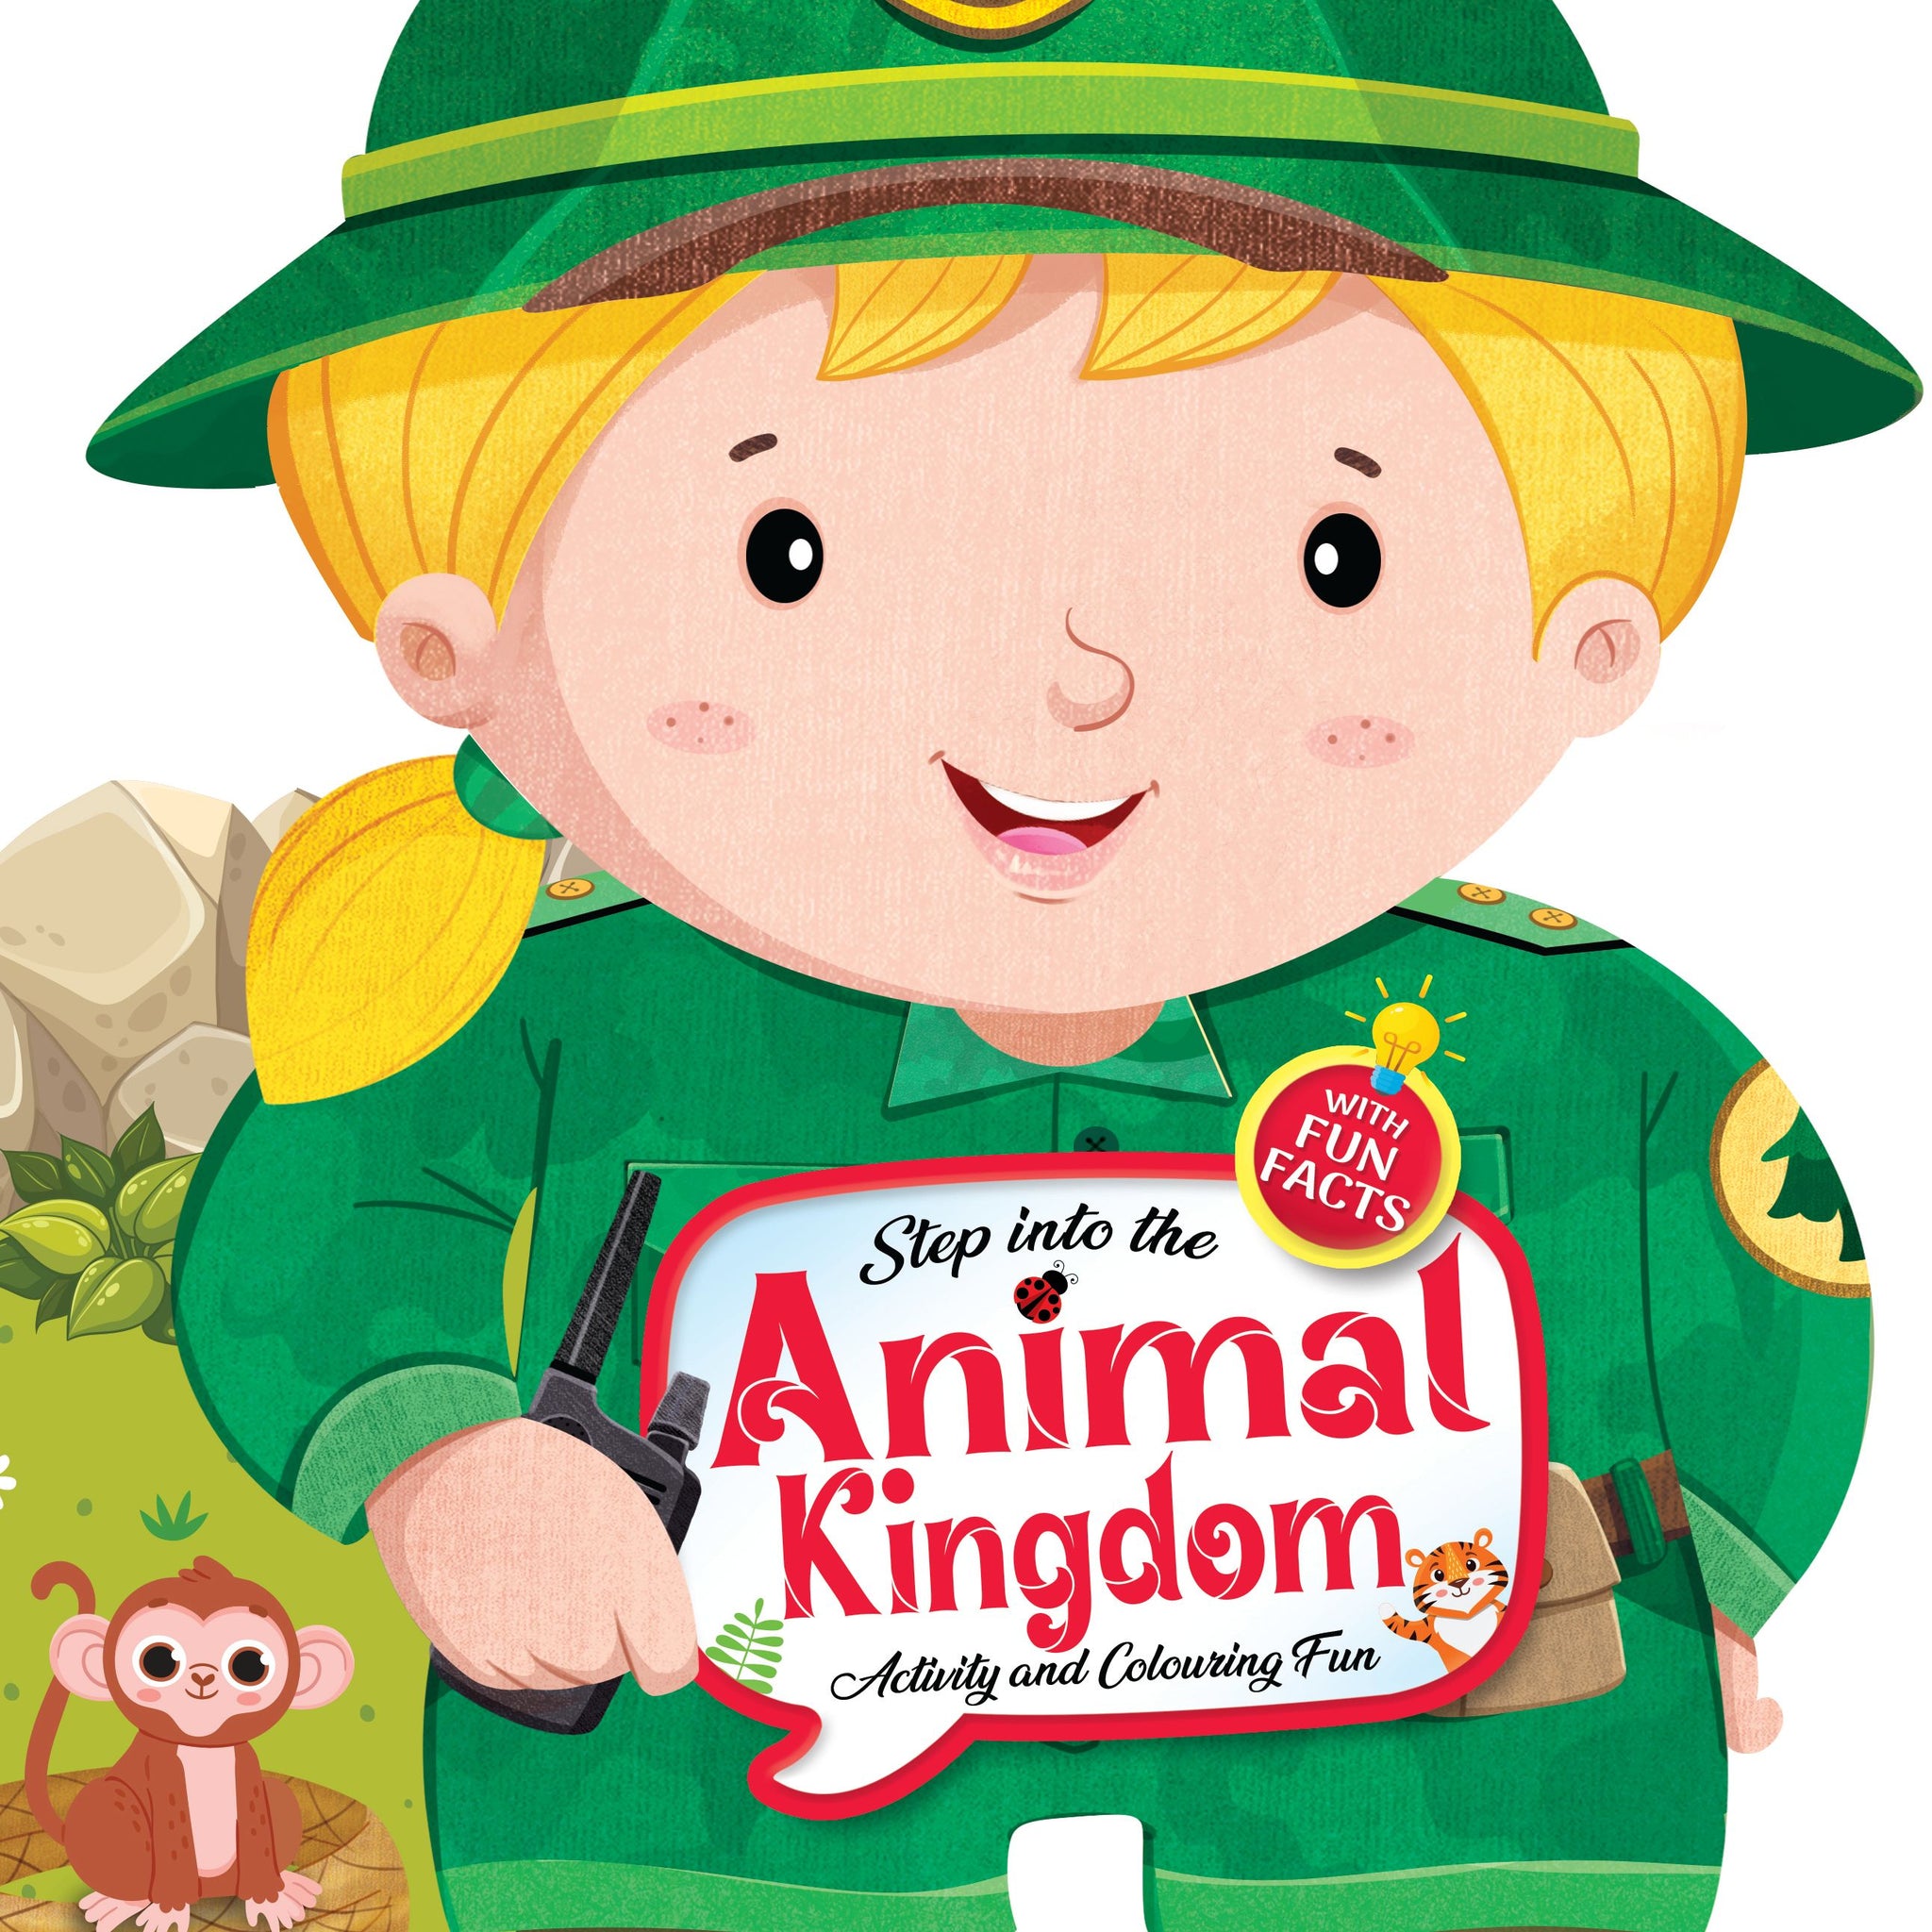 Step into the Animal Kingdom- Activity and Colouring Fun Book for Age 4+